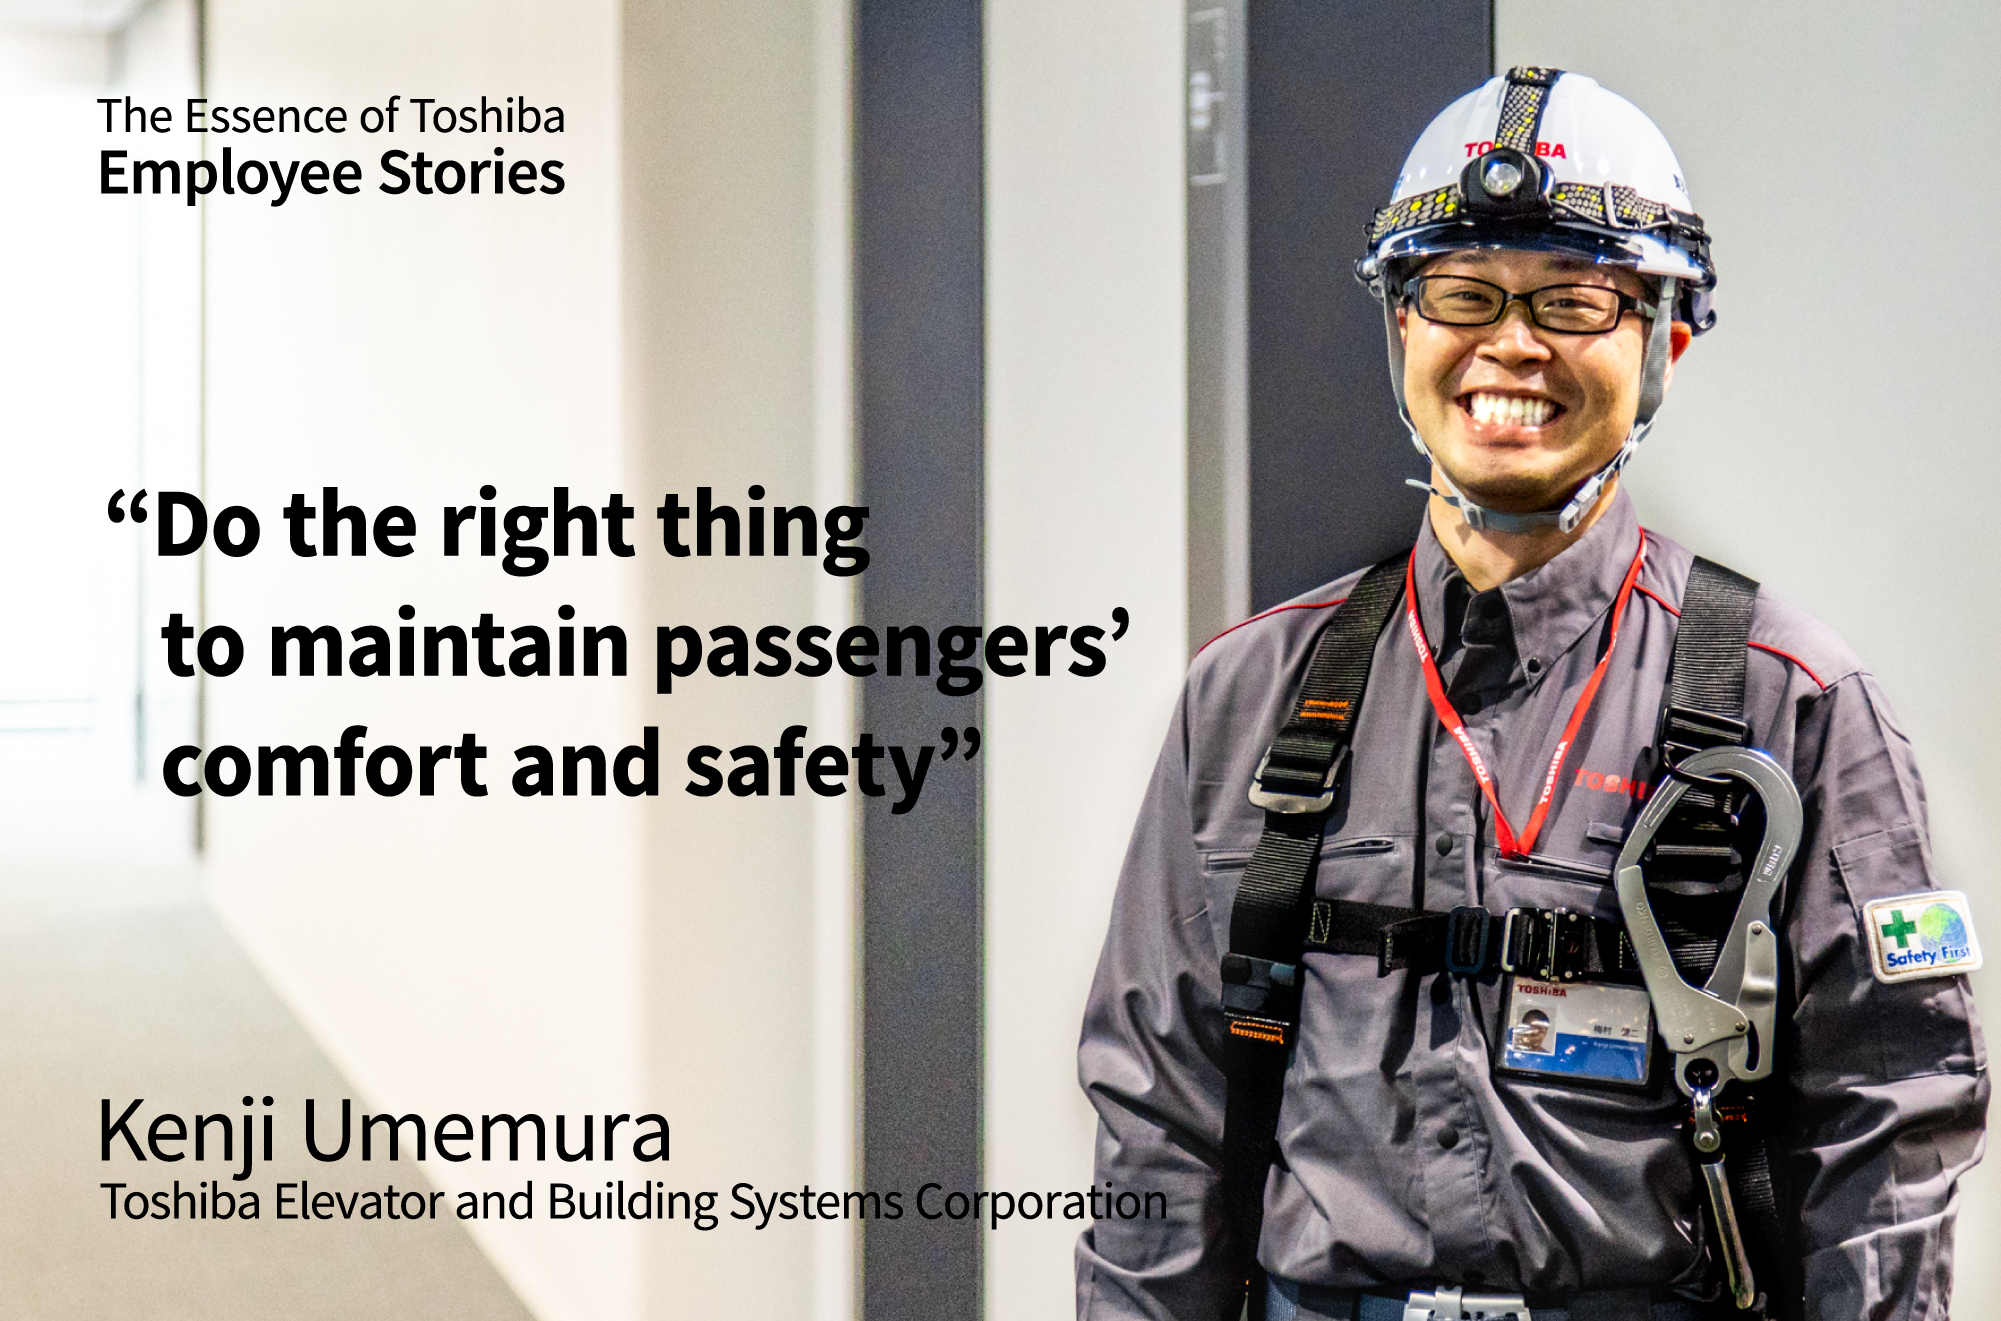 We Are Toshiba: Do the right thing to maintain passengers’ comfort and safety